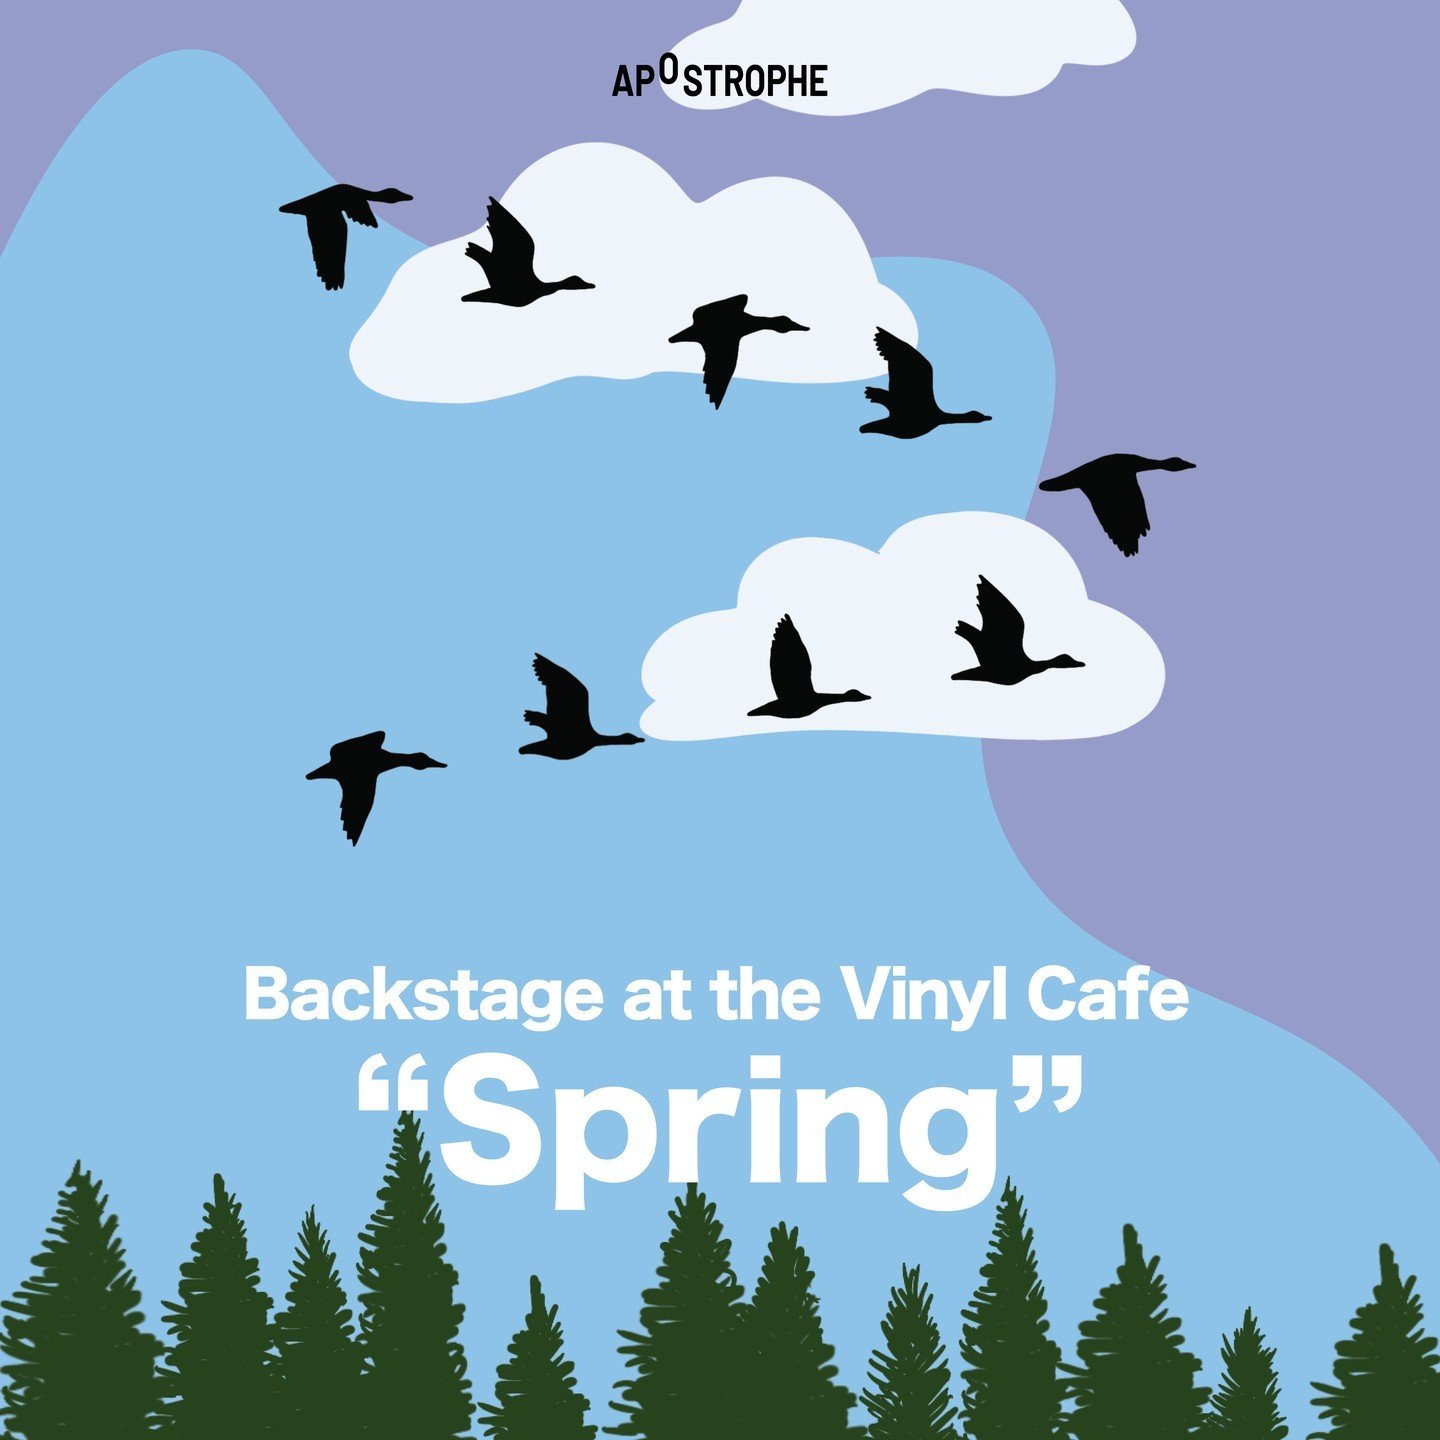 &ldquo;I guess I figured having a fish head could come in handy.&rdquo;
On this week&rsquo;s episode Stuart celebrates the joys of birding and the Spring bird migration. And we have two springy stories, including a favourite from the Vinyl Cafe story